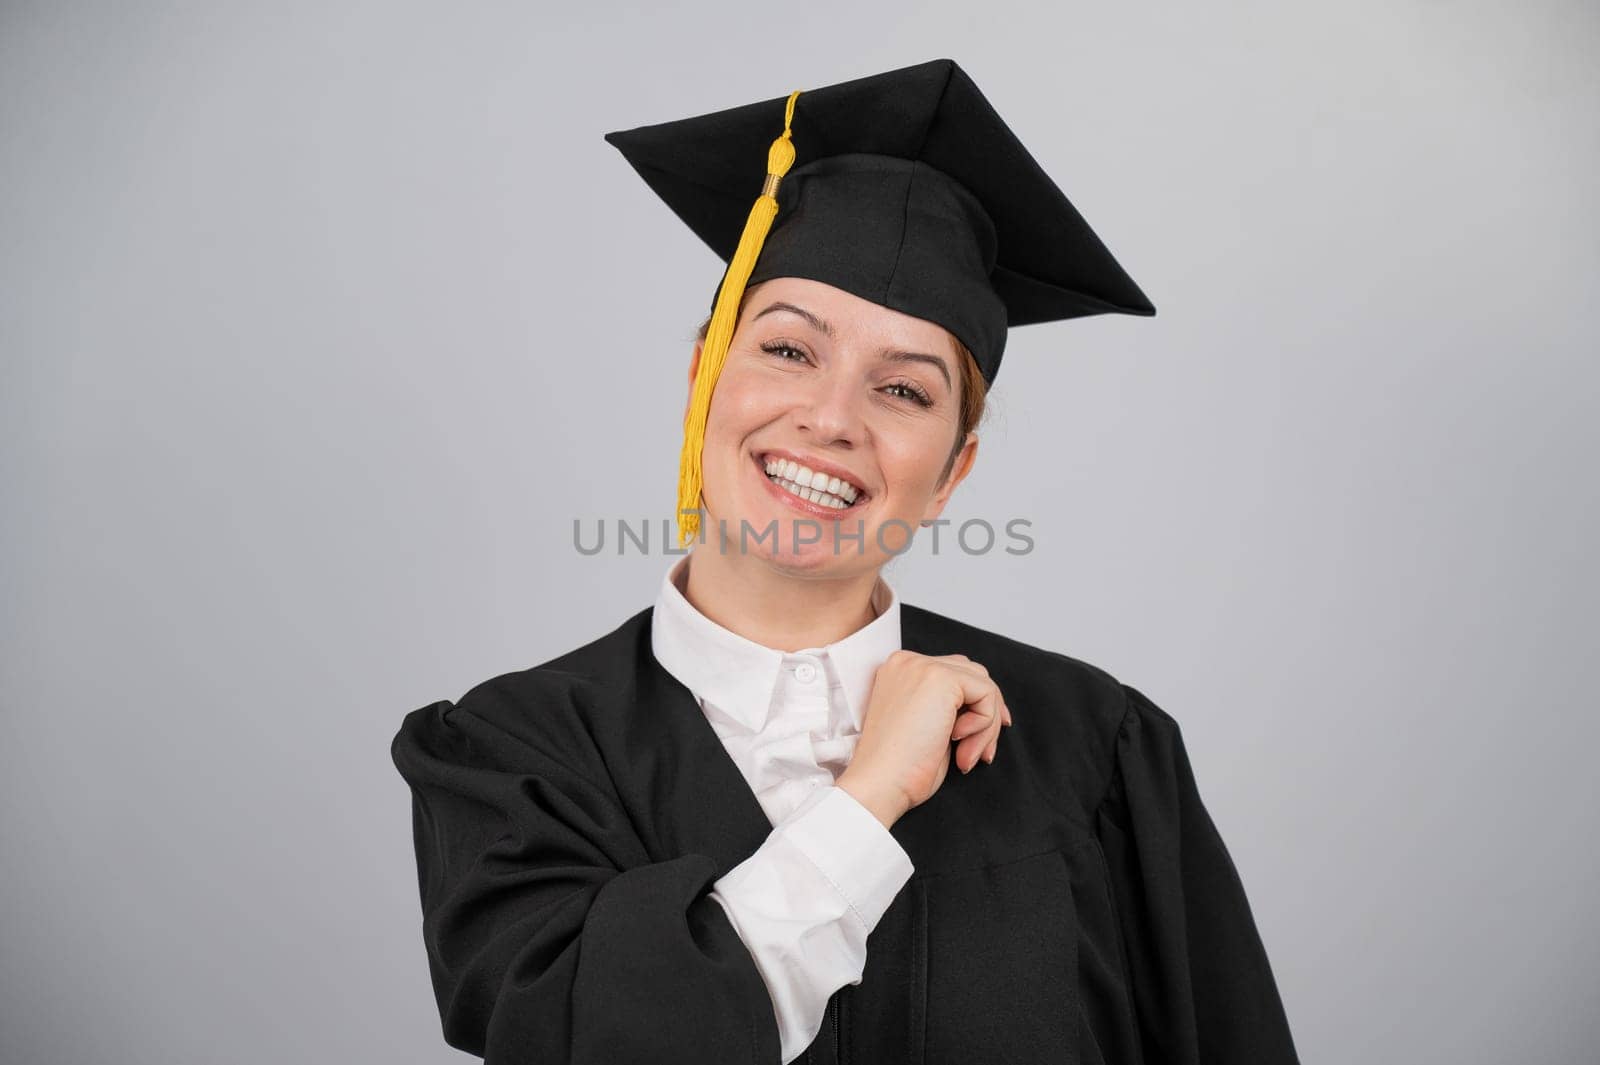 Smiling woman in graduation gown on white background. by mrwed54